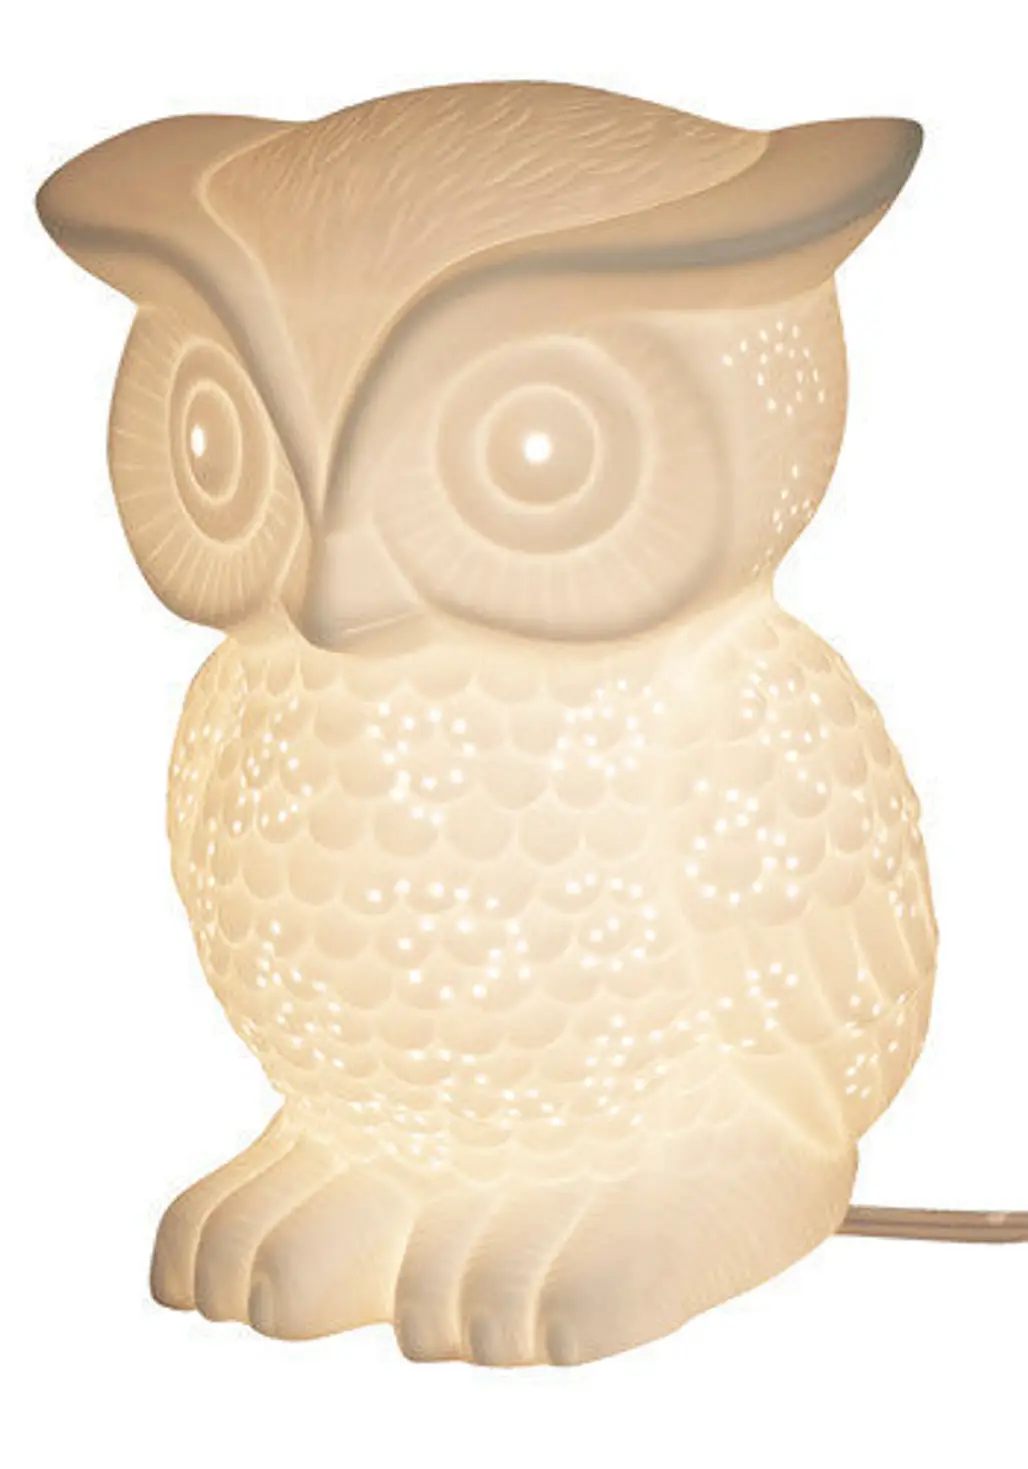 Nocturn-owl Lifestyle Lamp